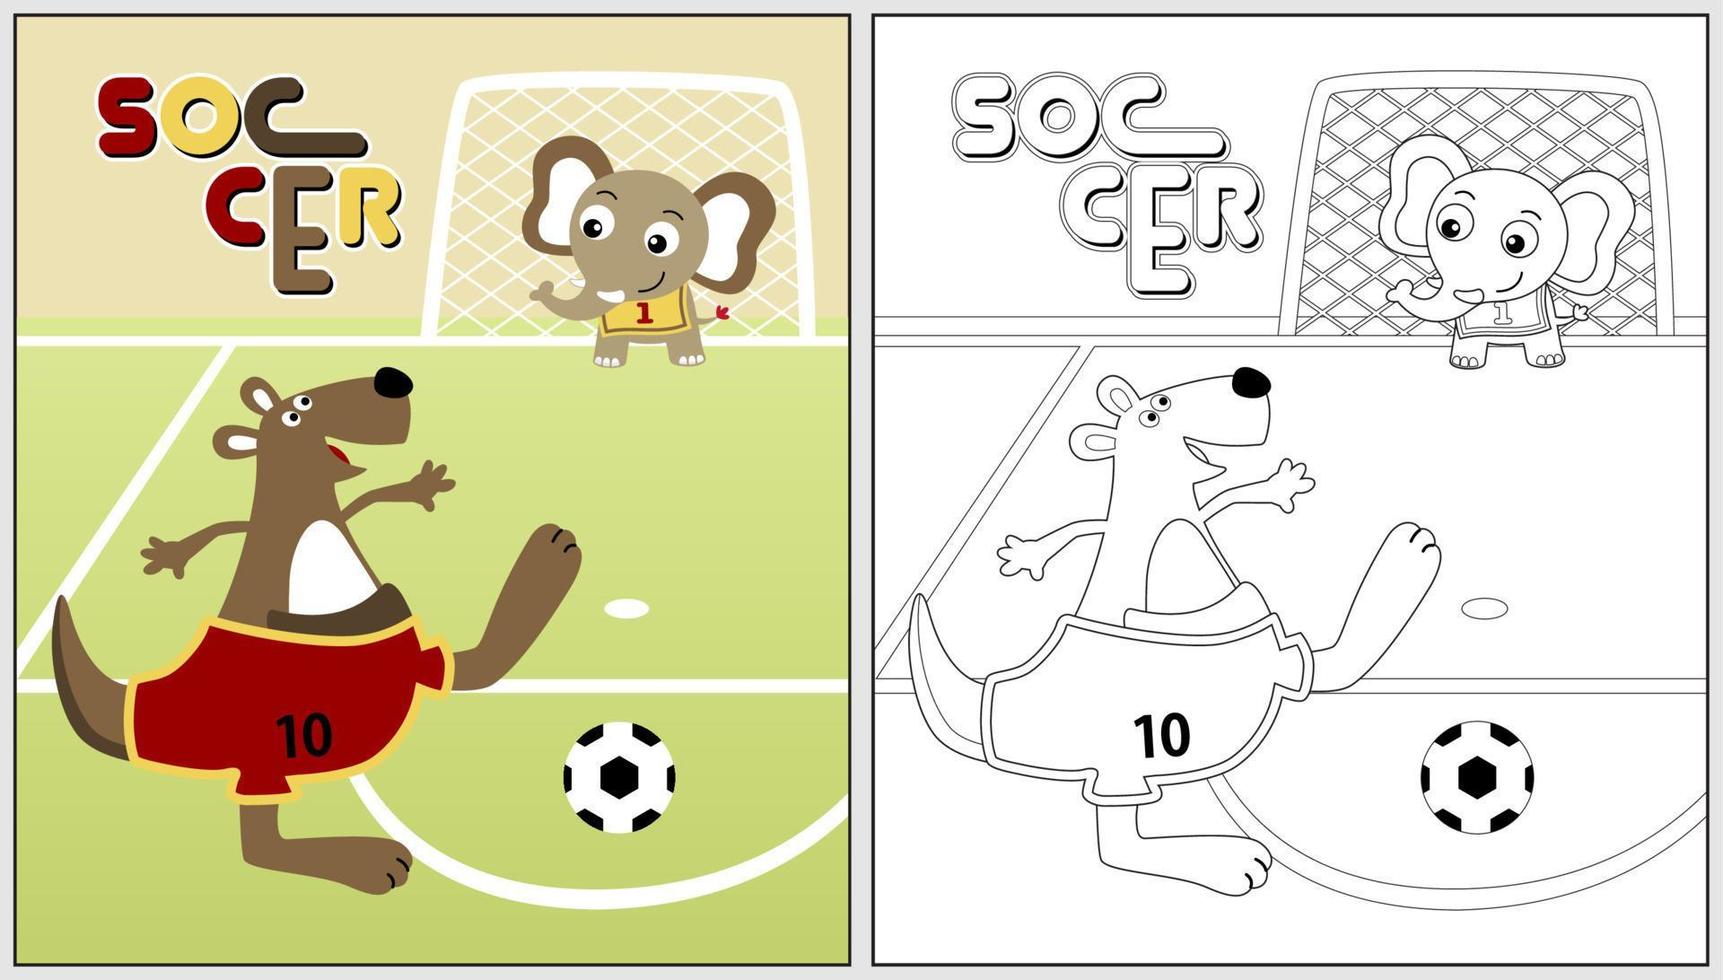 Funny kangaroo with elephant playing soccer, vector cartoon illustration, coloring book or page